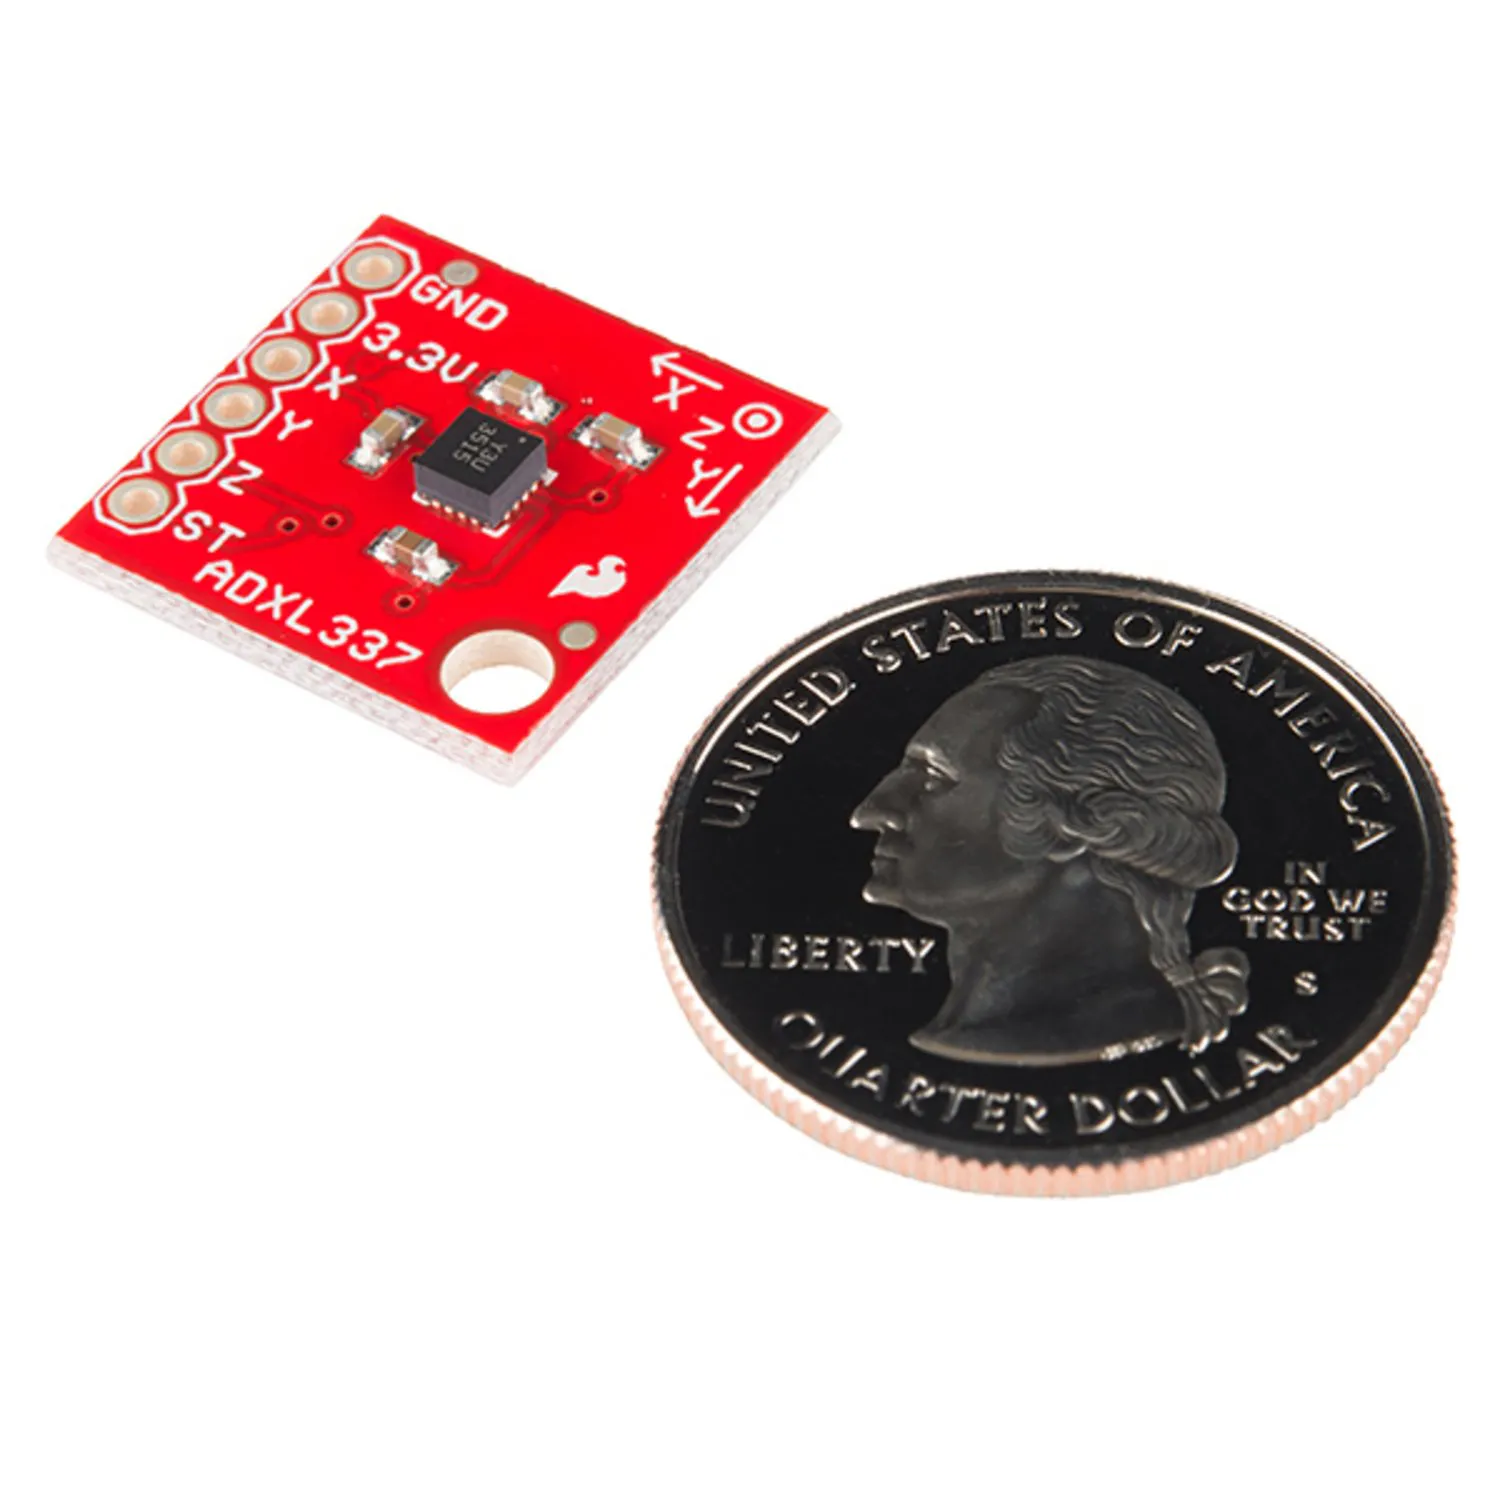 Photo of SparkFun Triple Axis Accelerometer Breakout - ADXL337